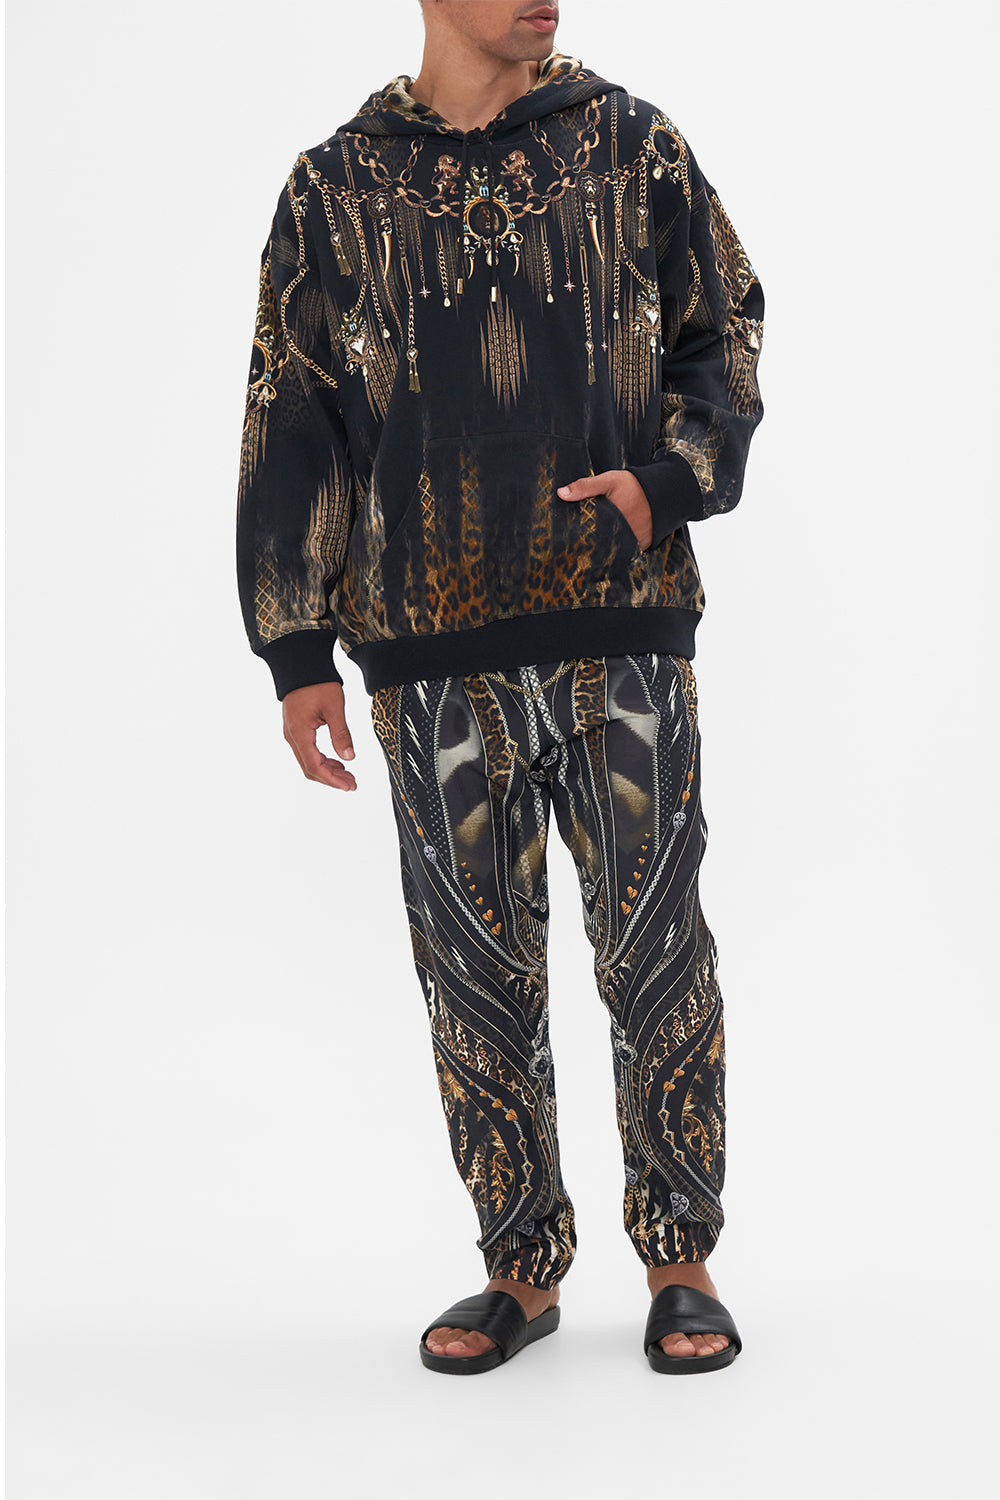 Front view of model wearing Hotel Franks by CAMILLA mens black oversized hoody in Jungle Dreaming print